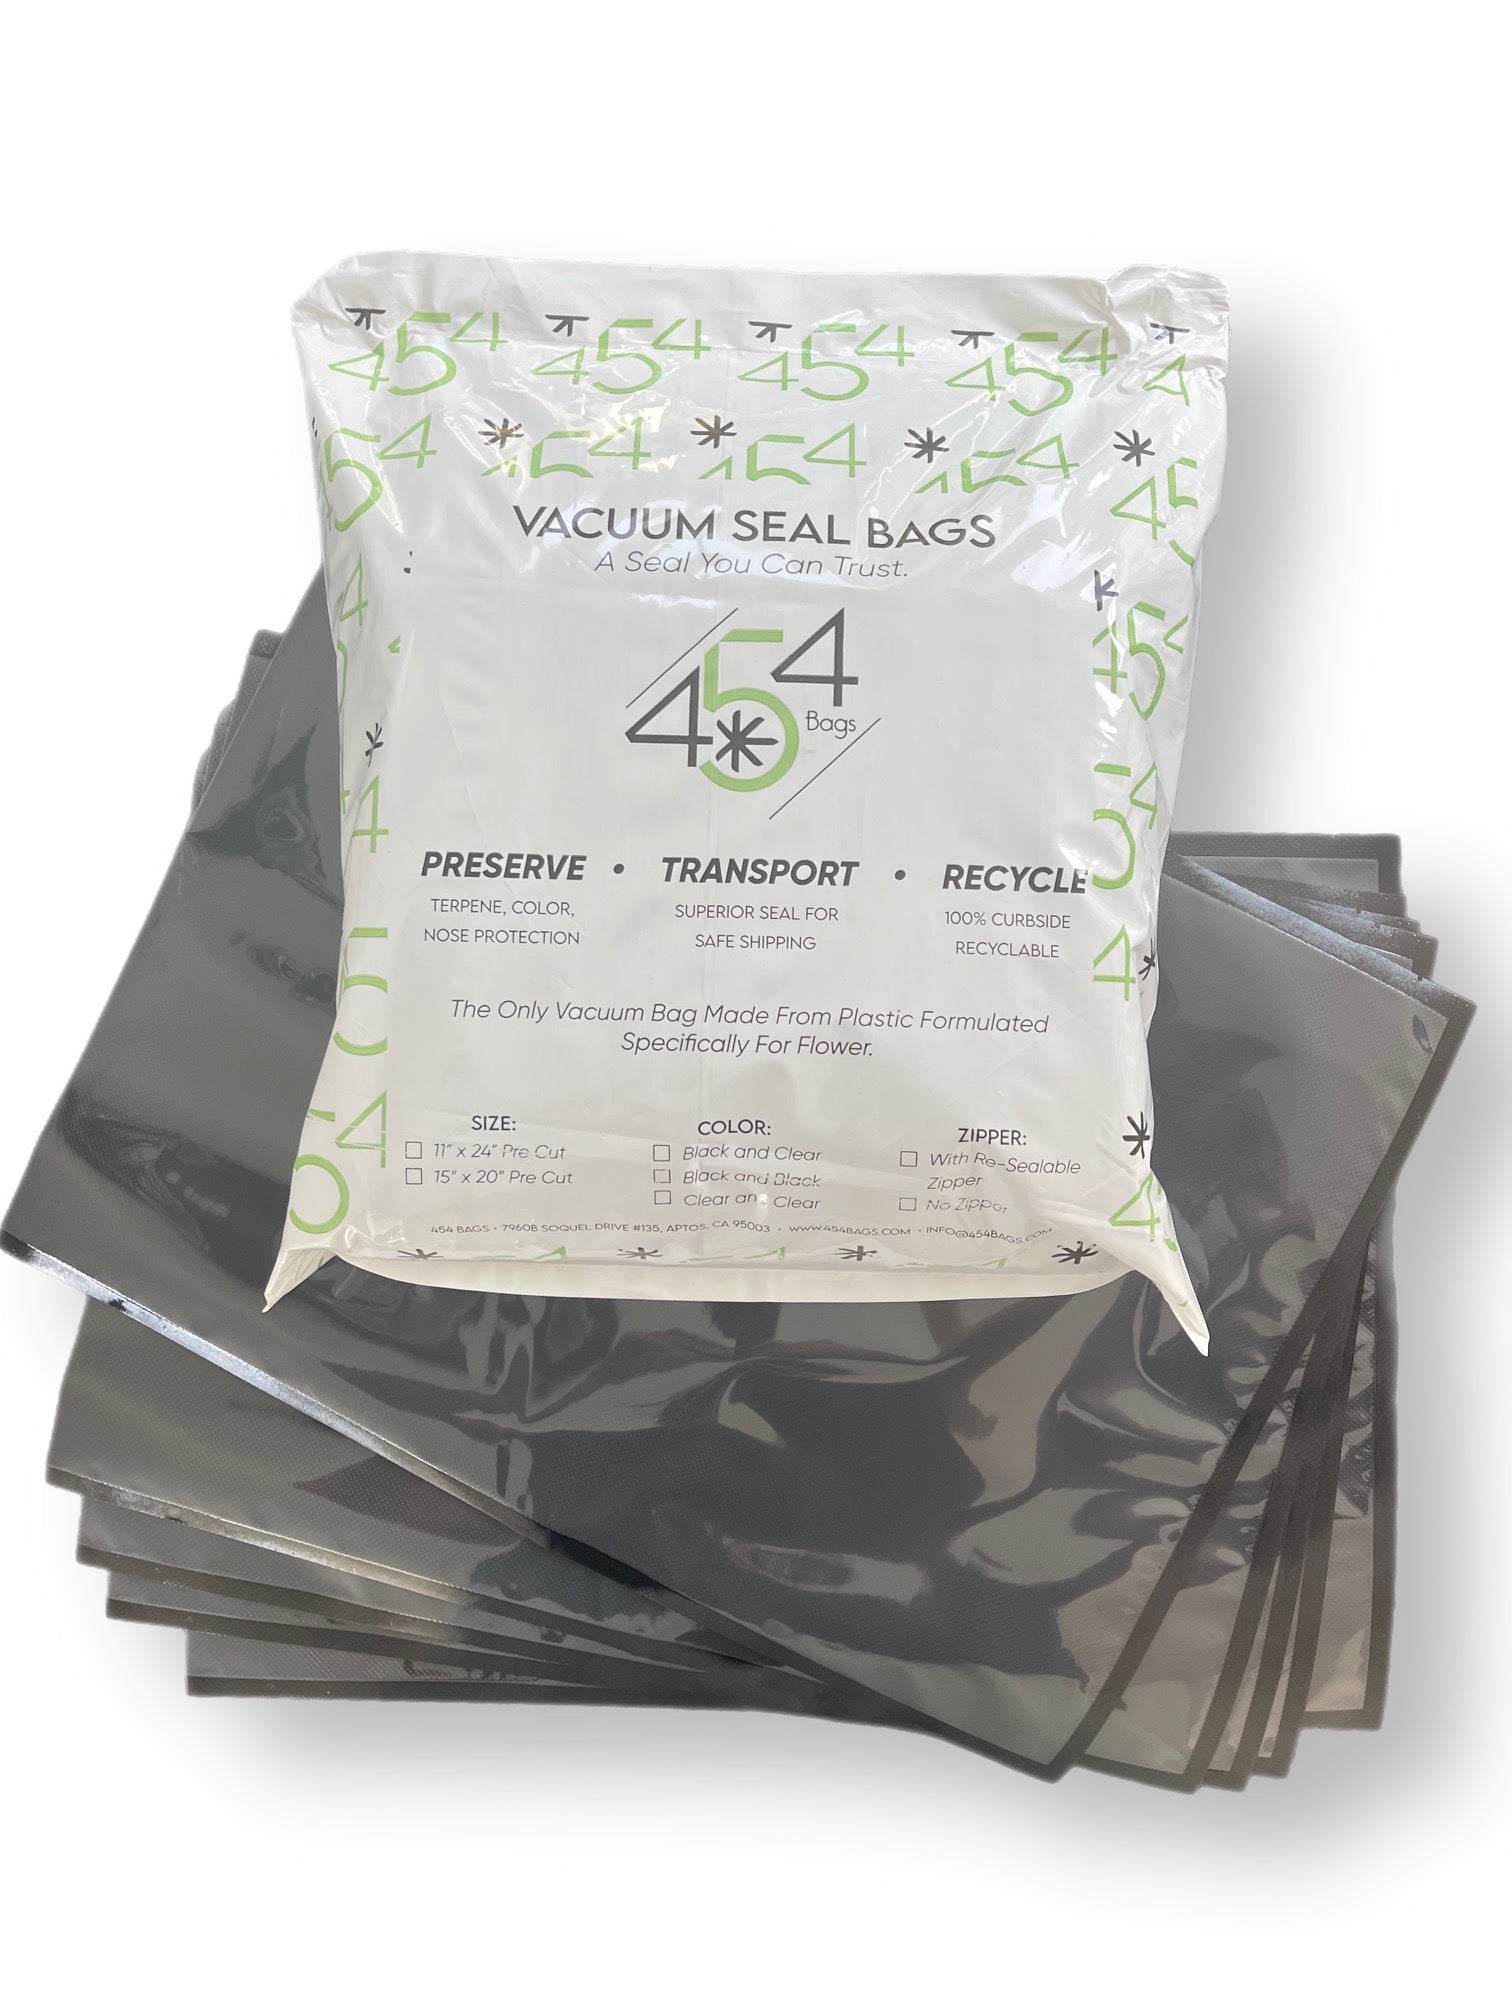 Packaging displaying the 454 Vacuum Bags alongside the actual bags. These 15"x20" bags, designed especially for cannabis, have a clear side for easy content visibility and a black side for discretion.